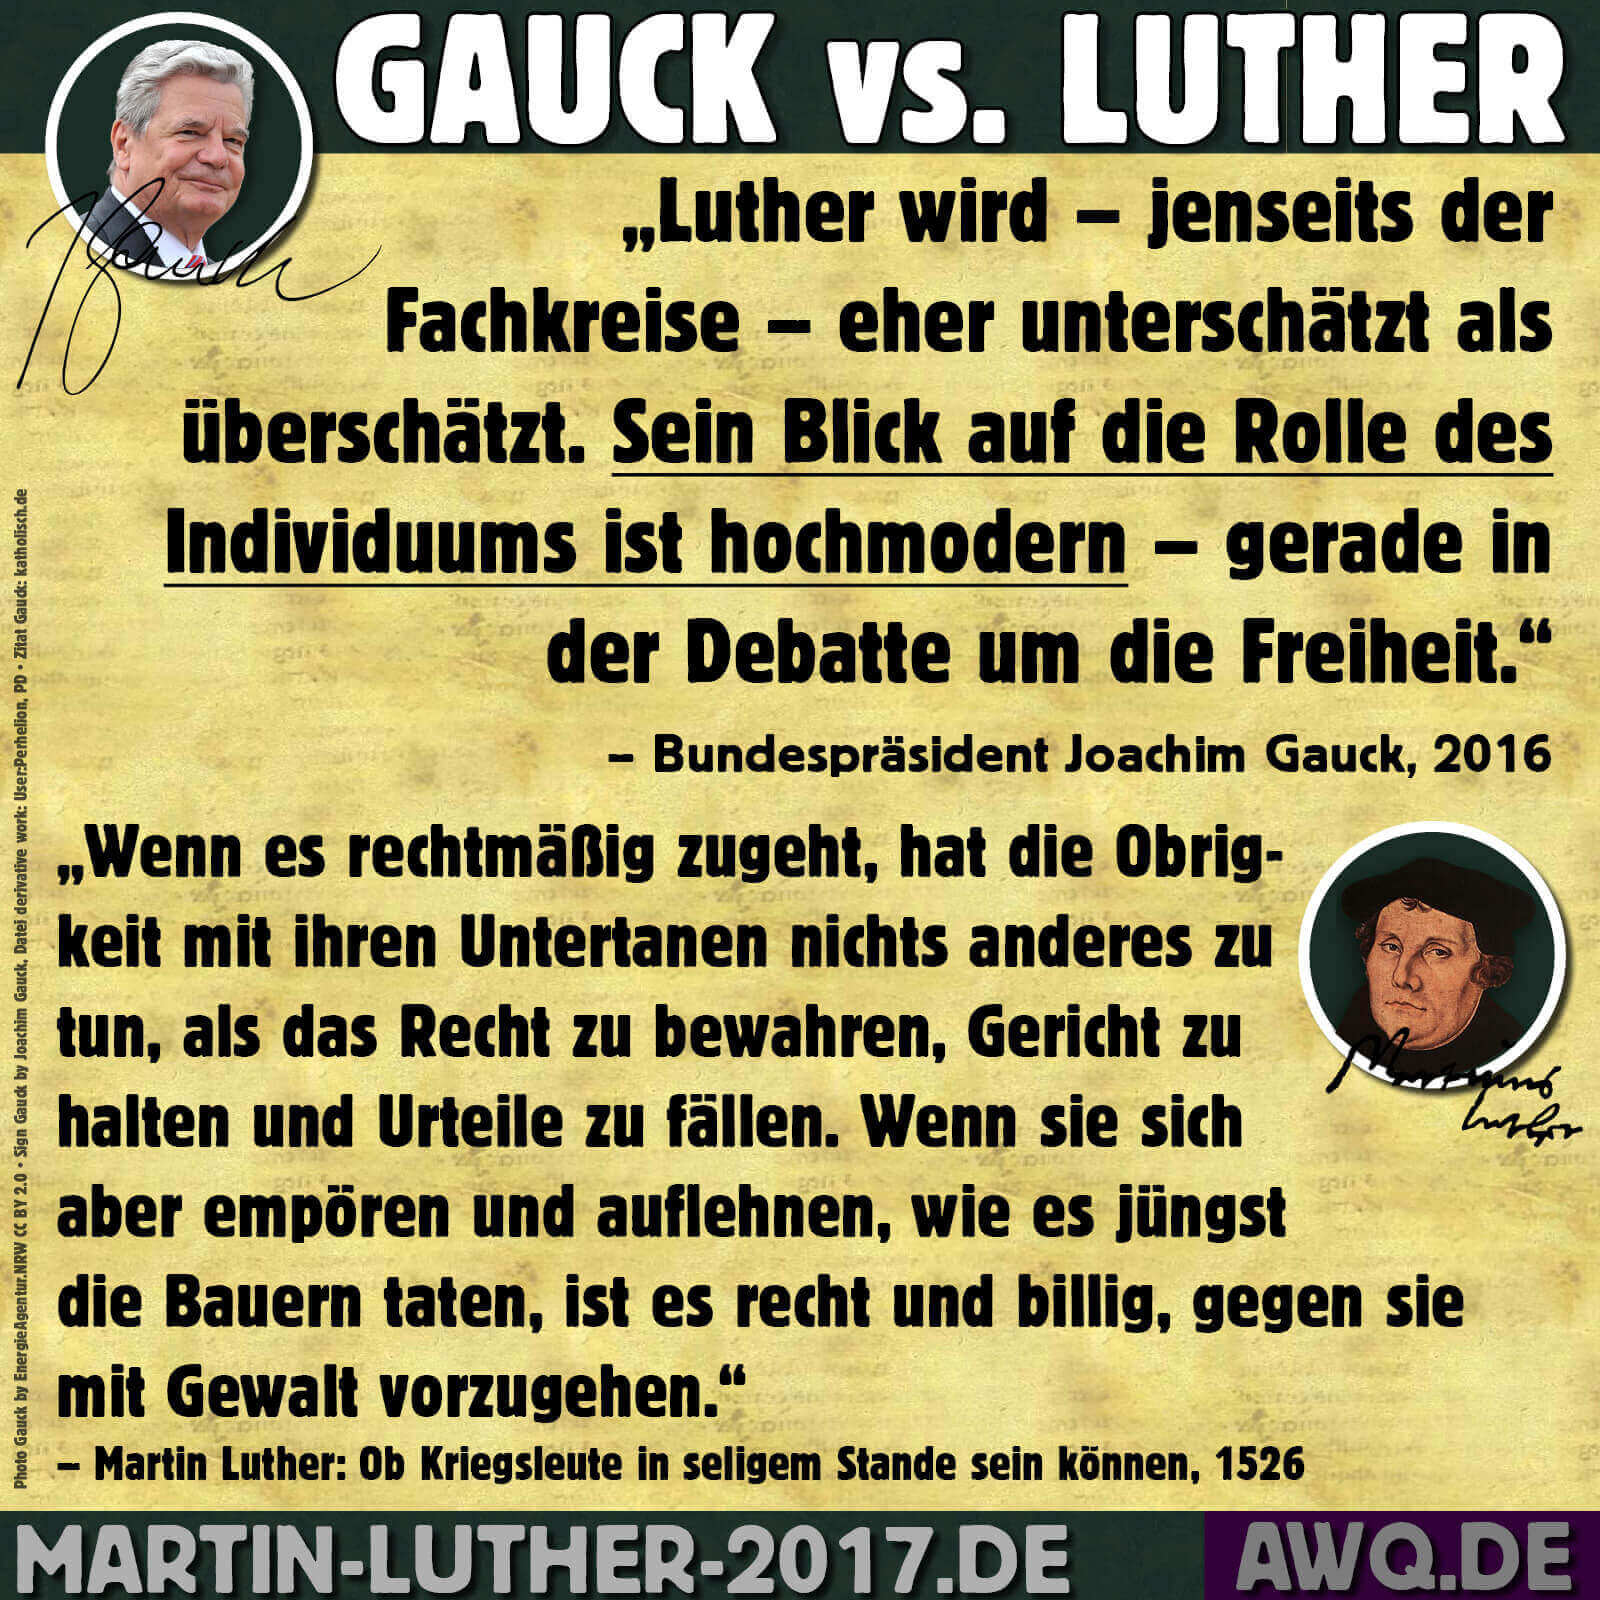 Gauck vs. Luther (3)